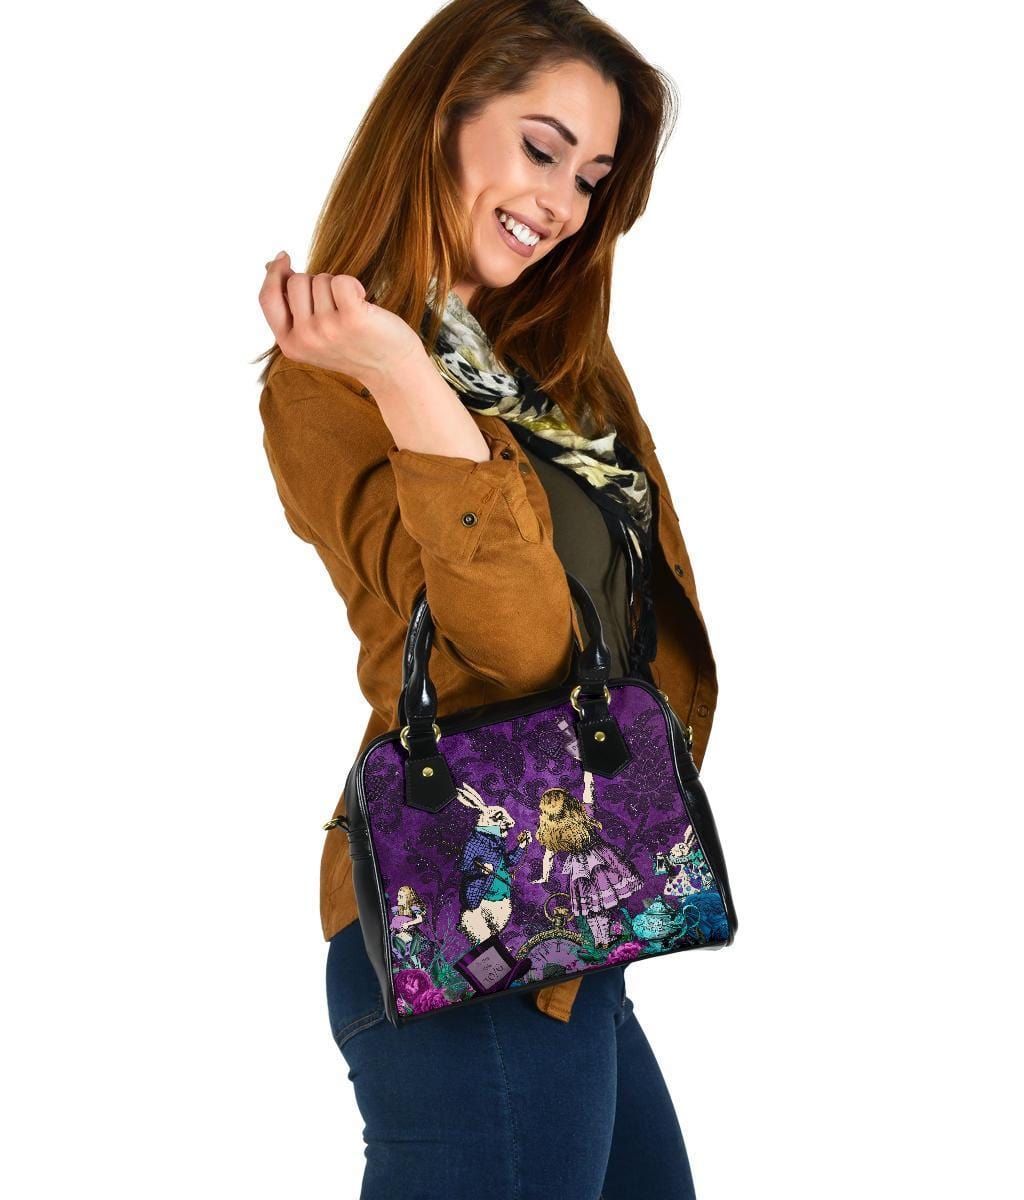 woman looking at her birthday present of the Gothic cute Alice in Wonderland vegan handbag on a purple damask pattern background